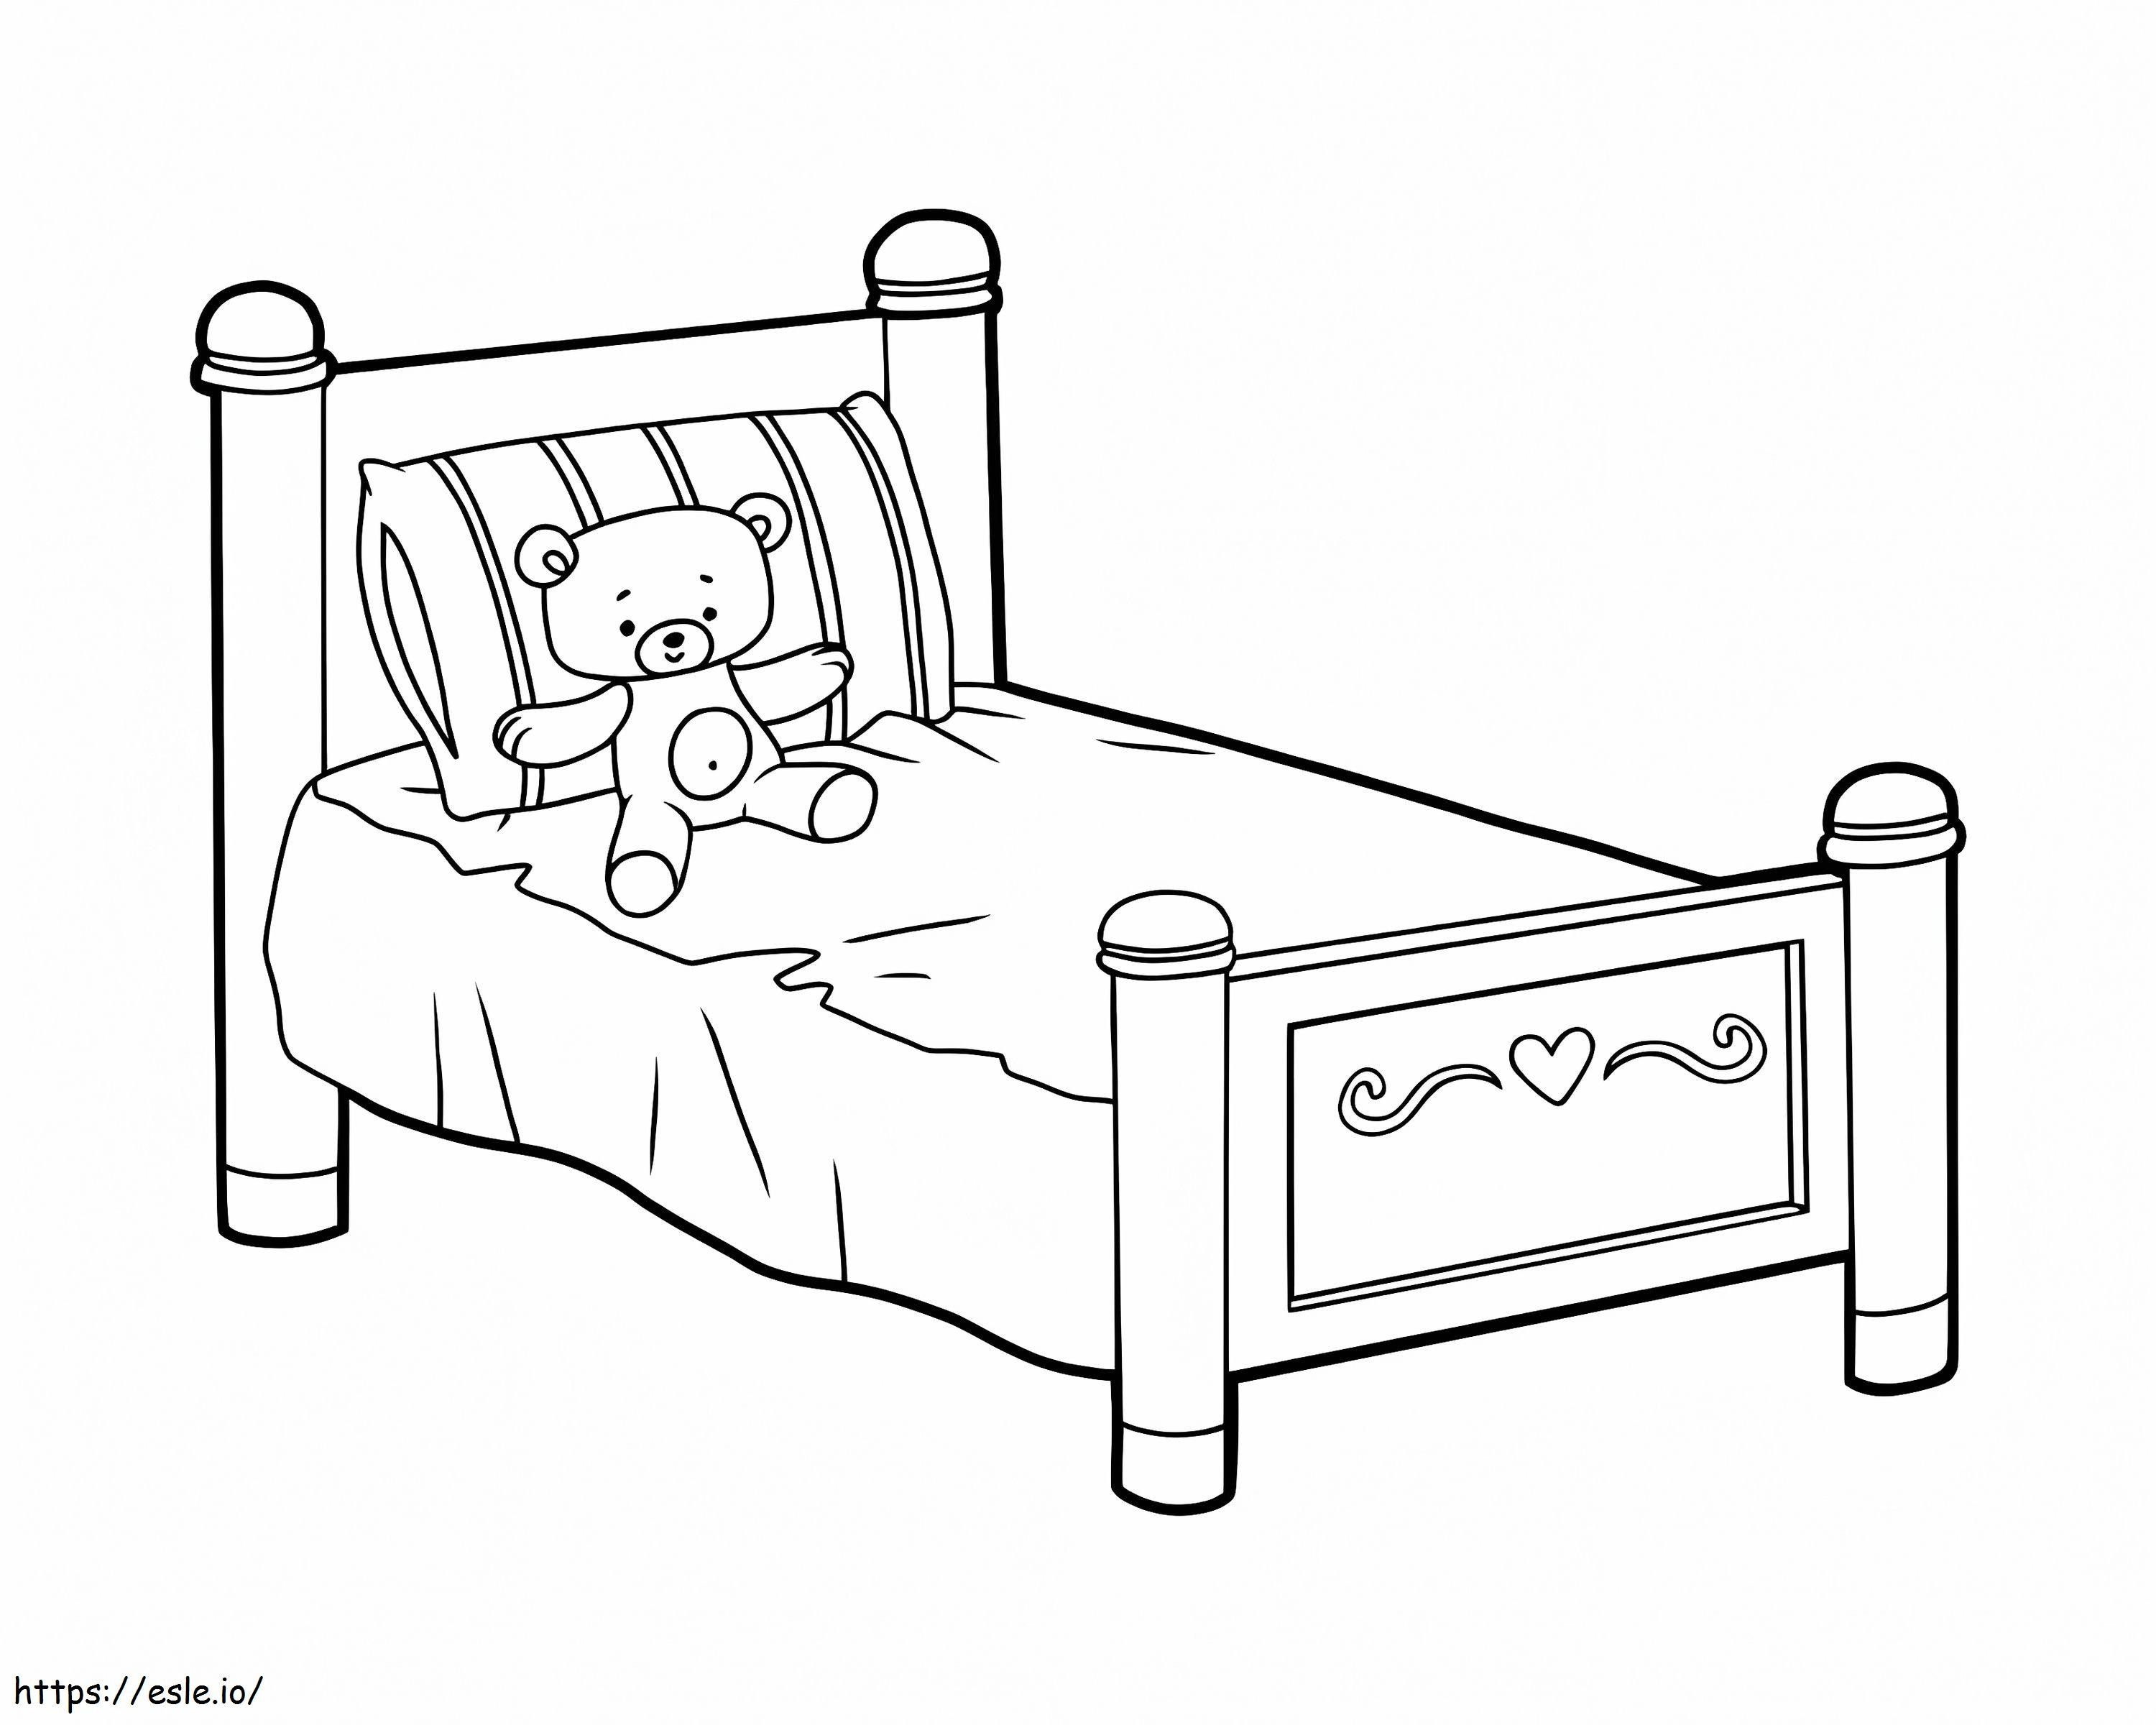 Teddy Bear In Bed coloring page